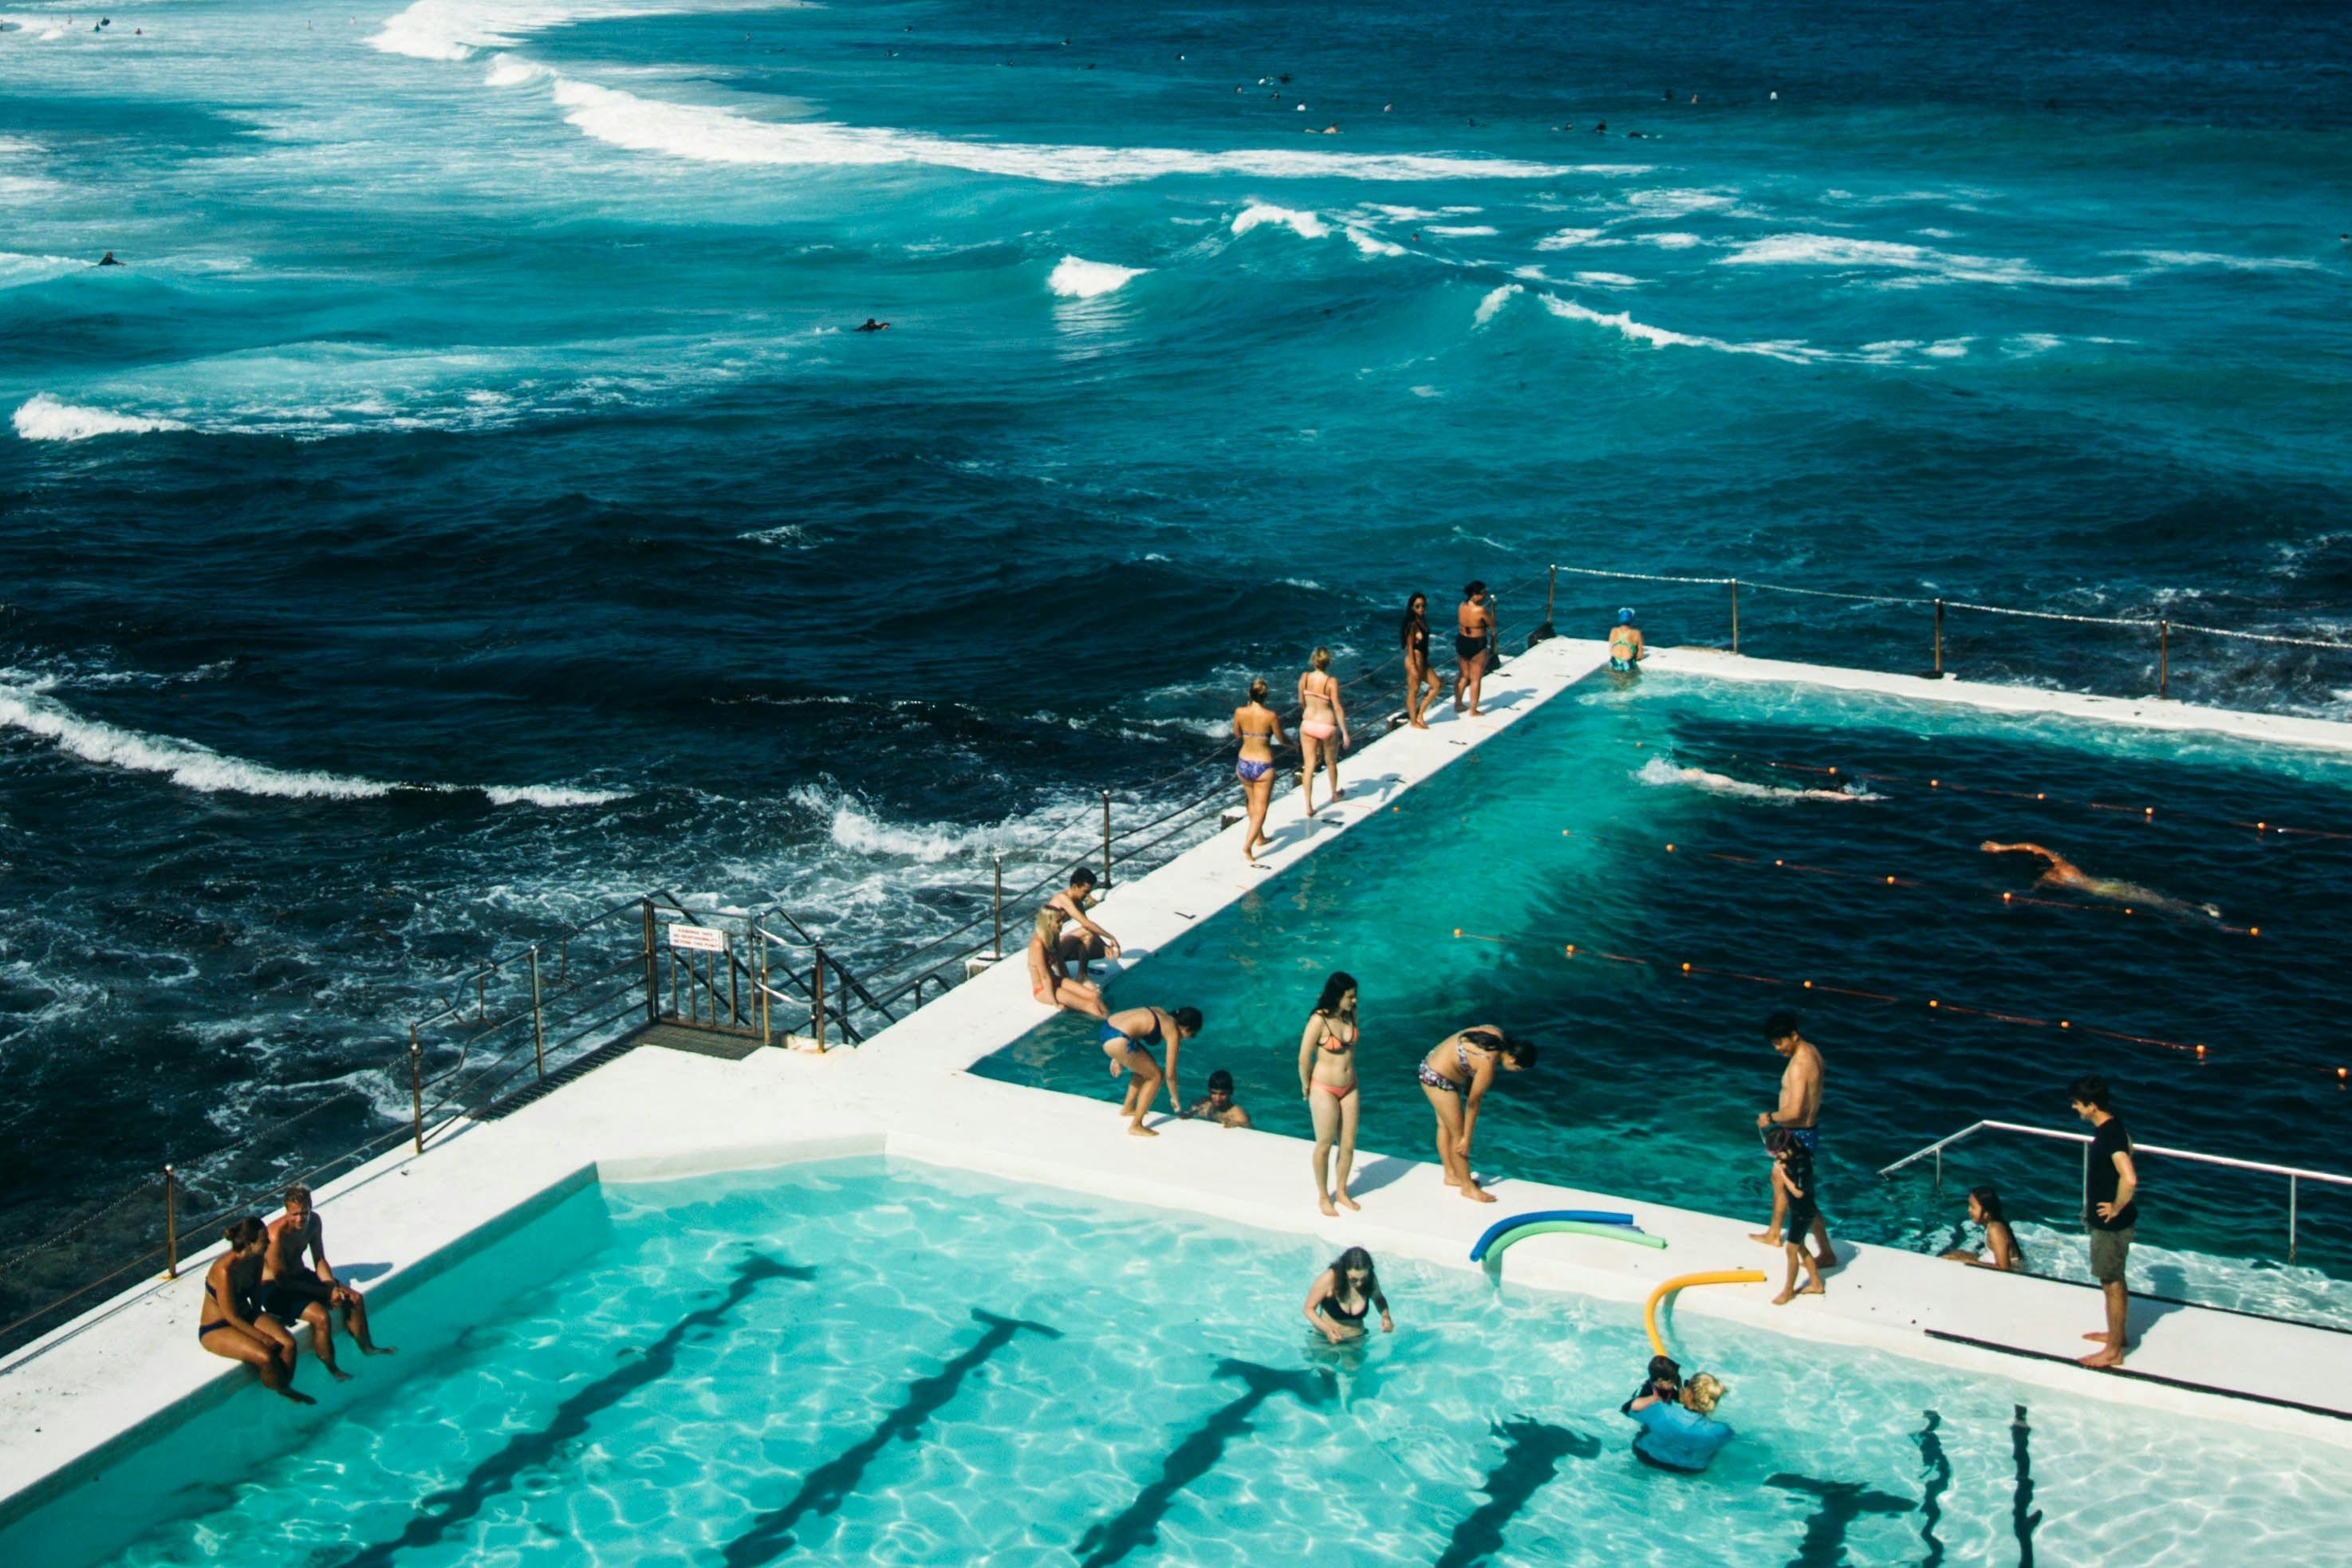 Swimming pool with people next to the ocean in Bondi Beach.